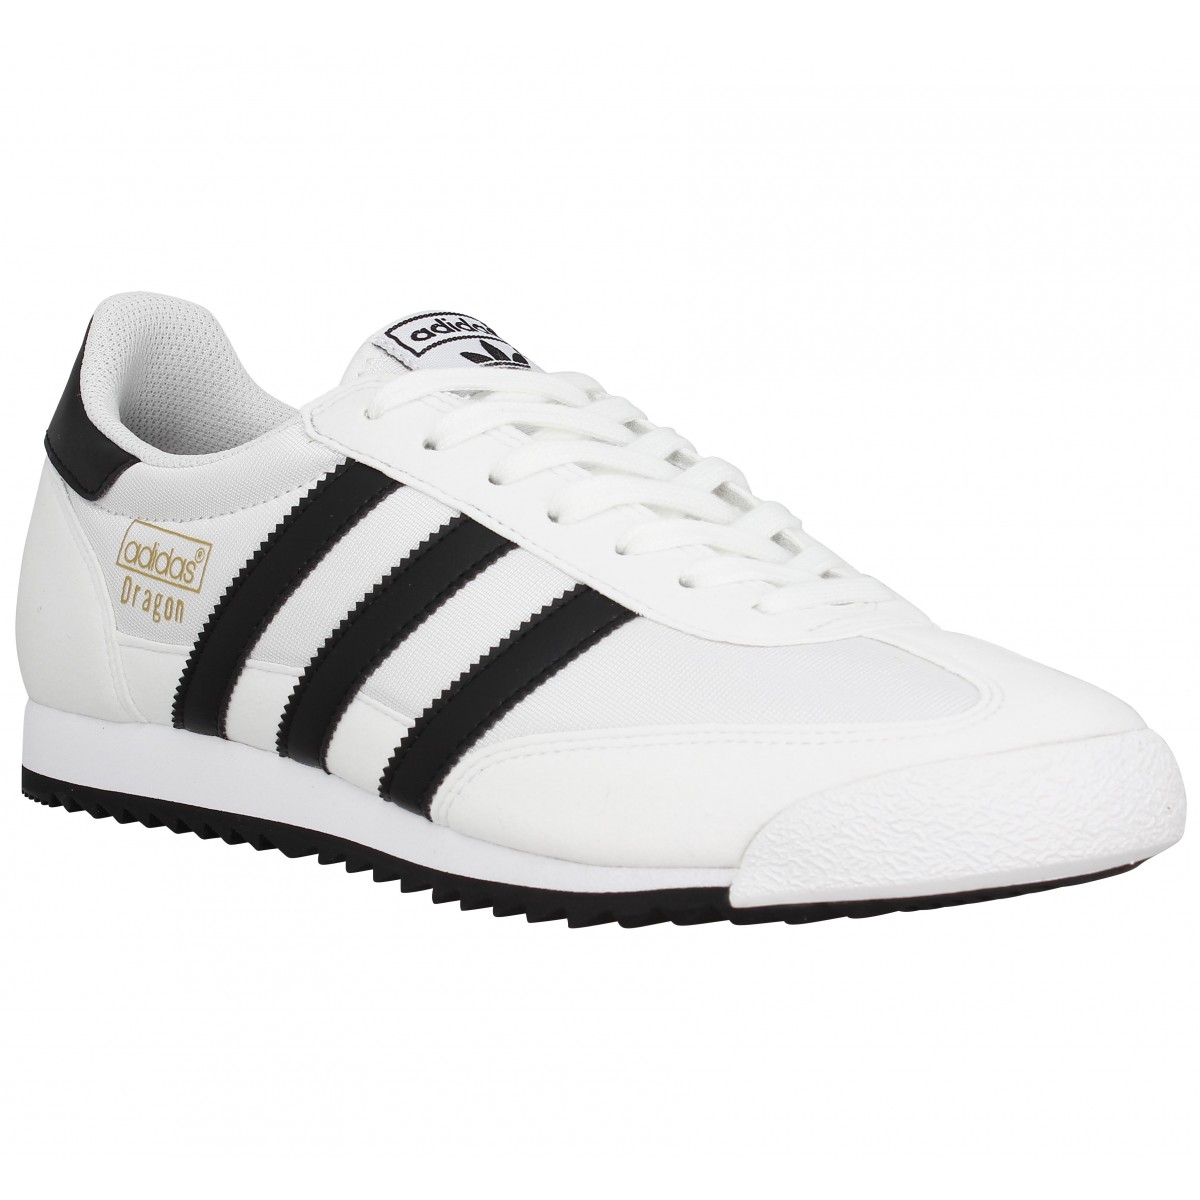 adidas dragon sneakers homme